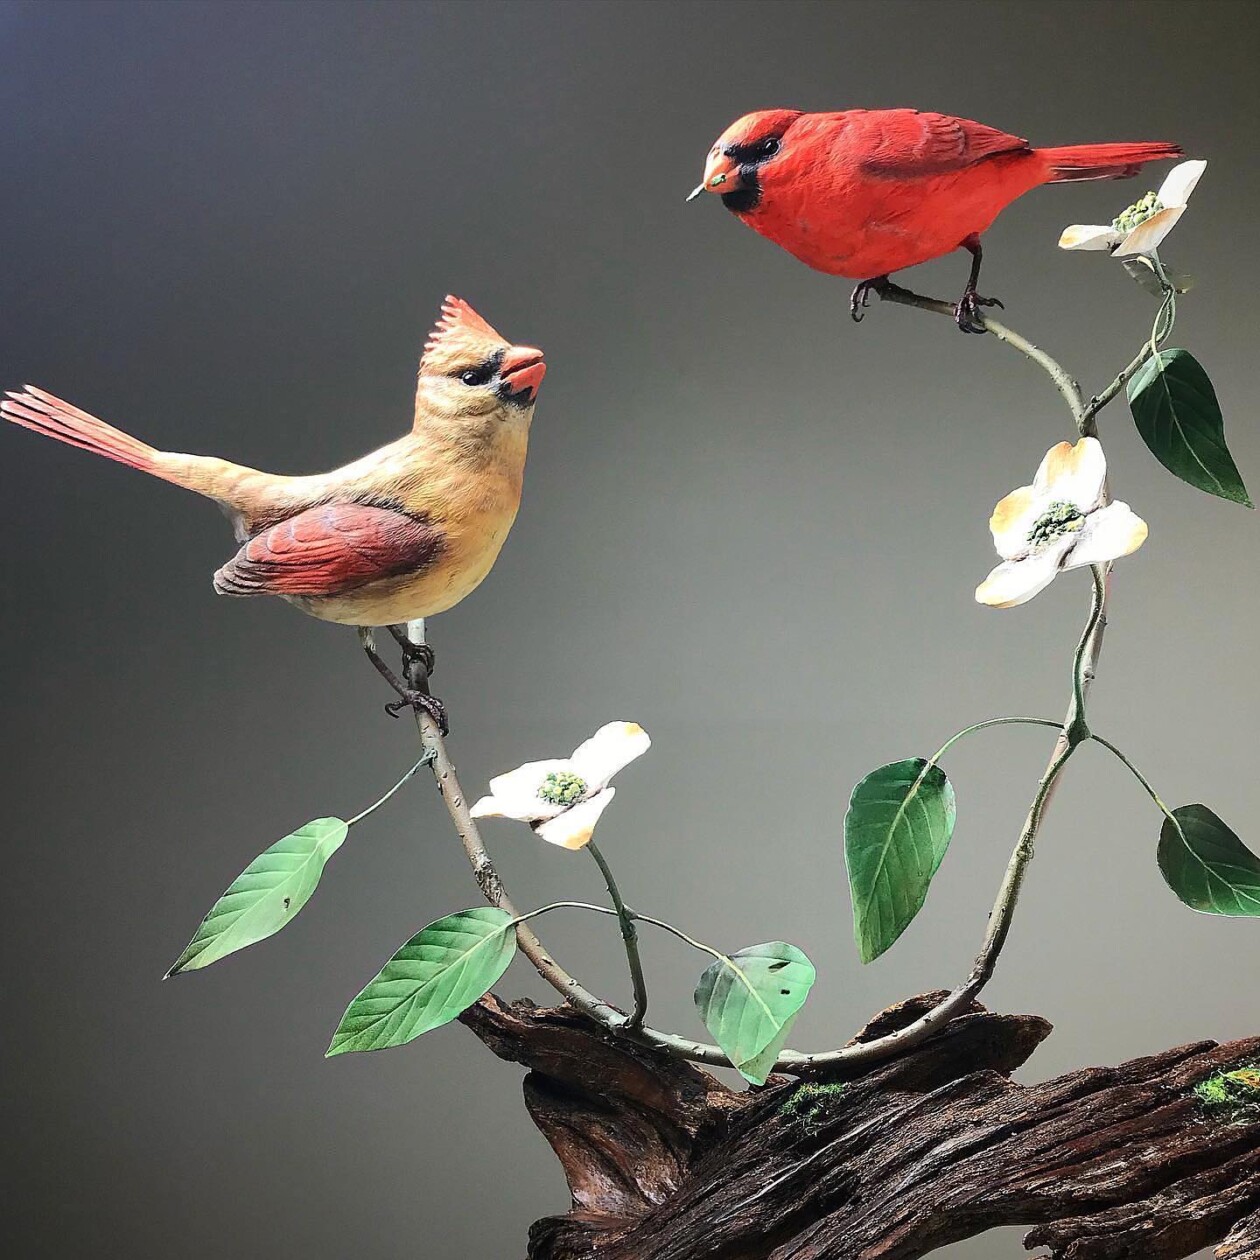 From Branch To Breathtaking, The Art Of Chris Wilson's Wildlife Sculptures (7)